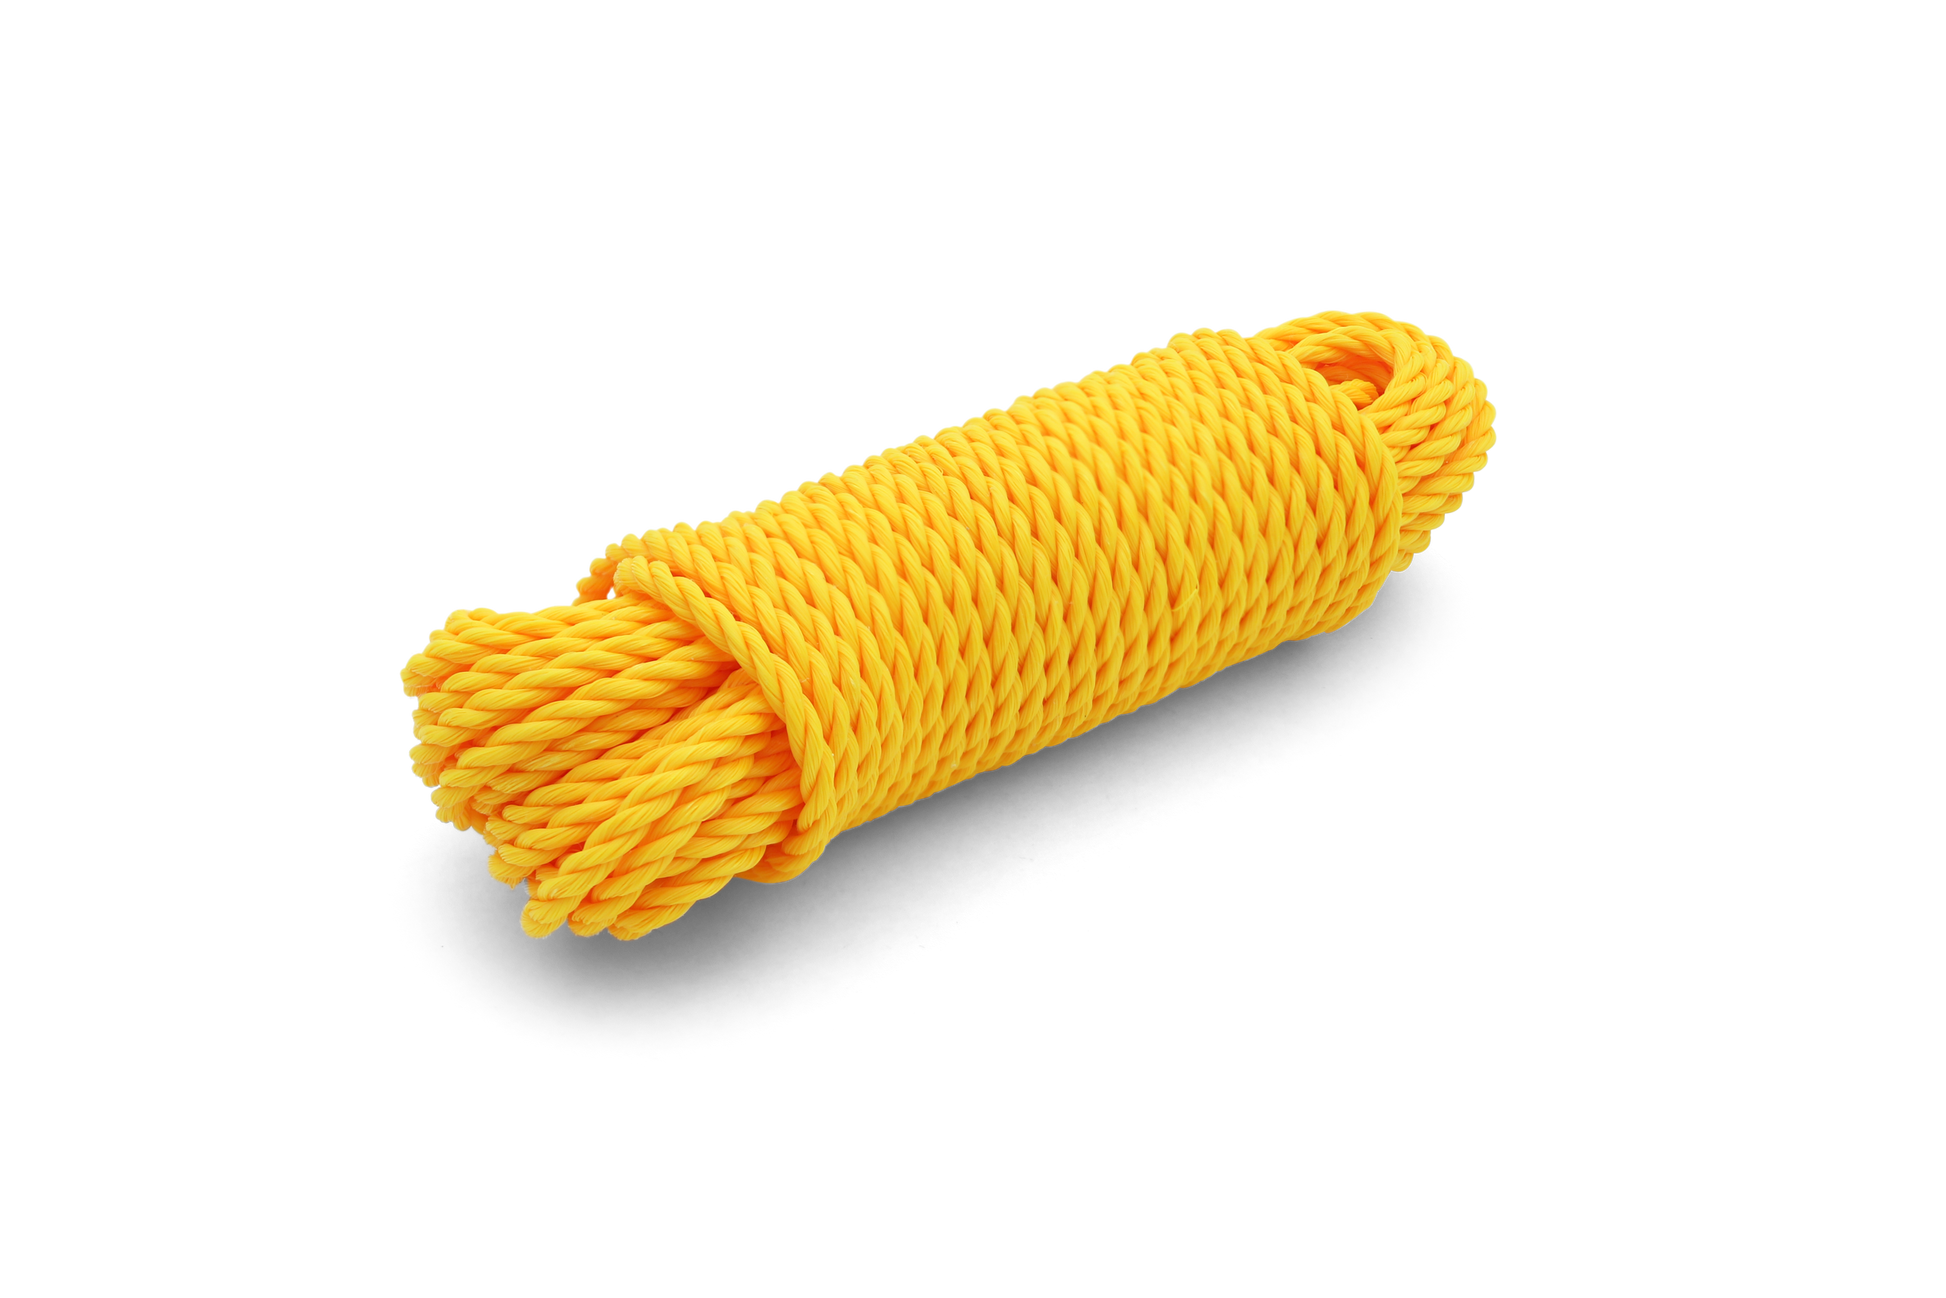 Coghlans Utility Rope - 6 mm